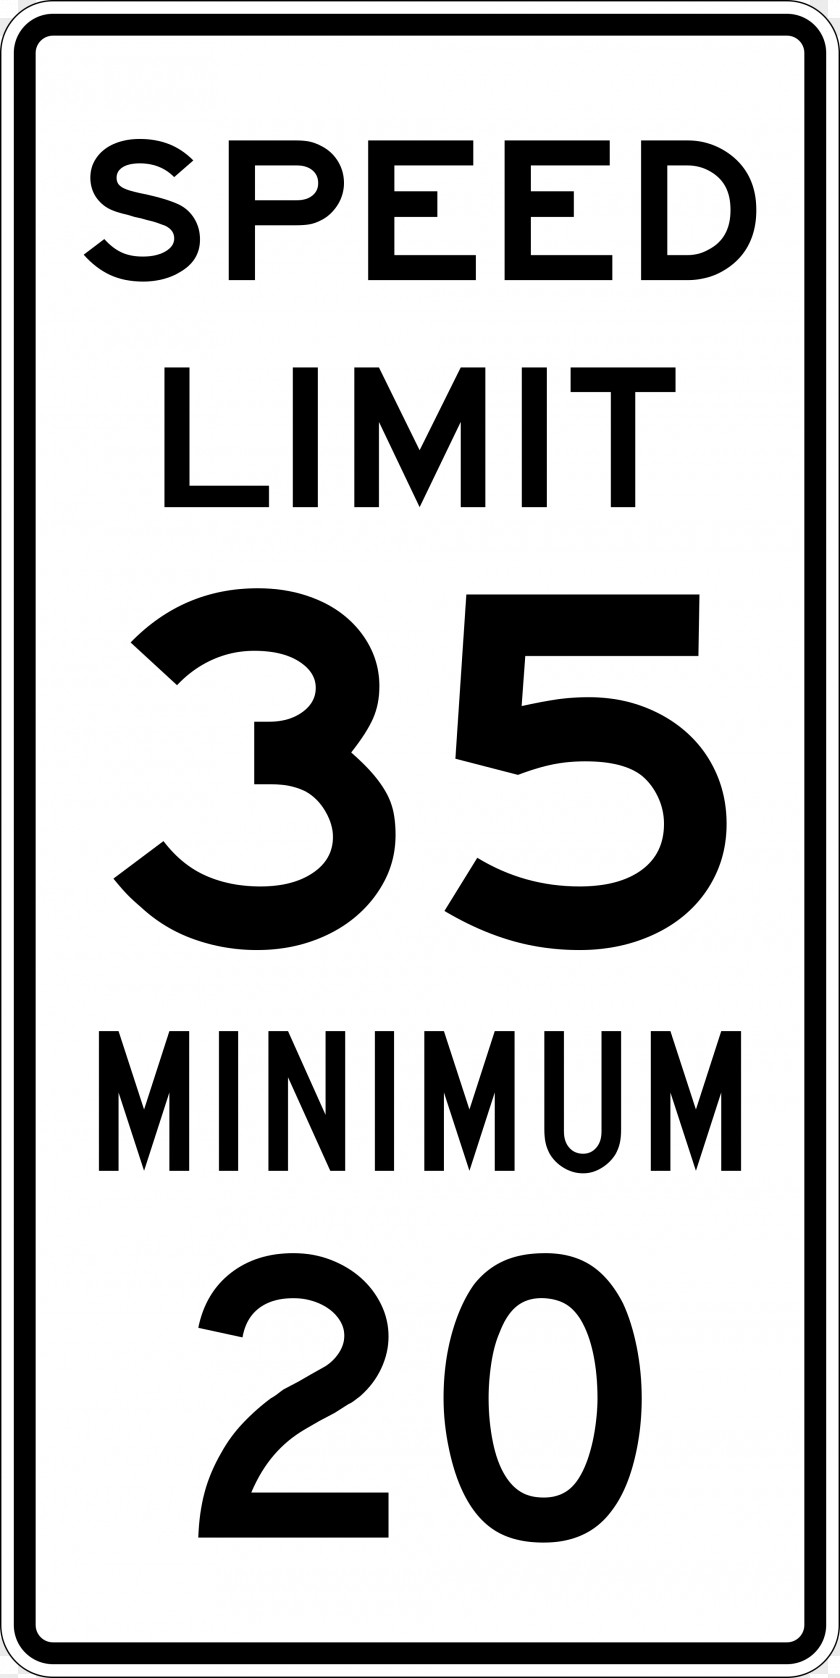 Speed Limit Traffic Sign Manual On Uniform Control Devices Road Safety PNG